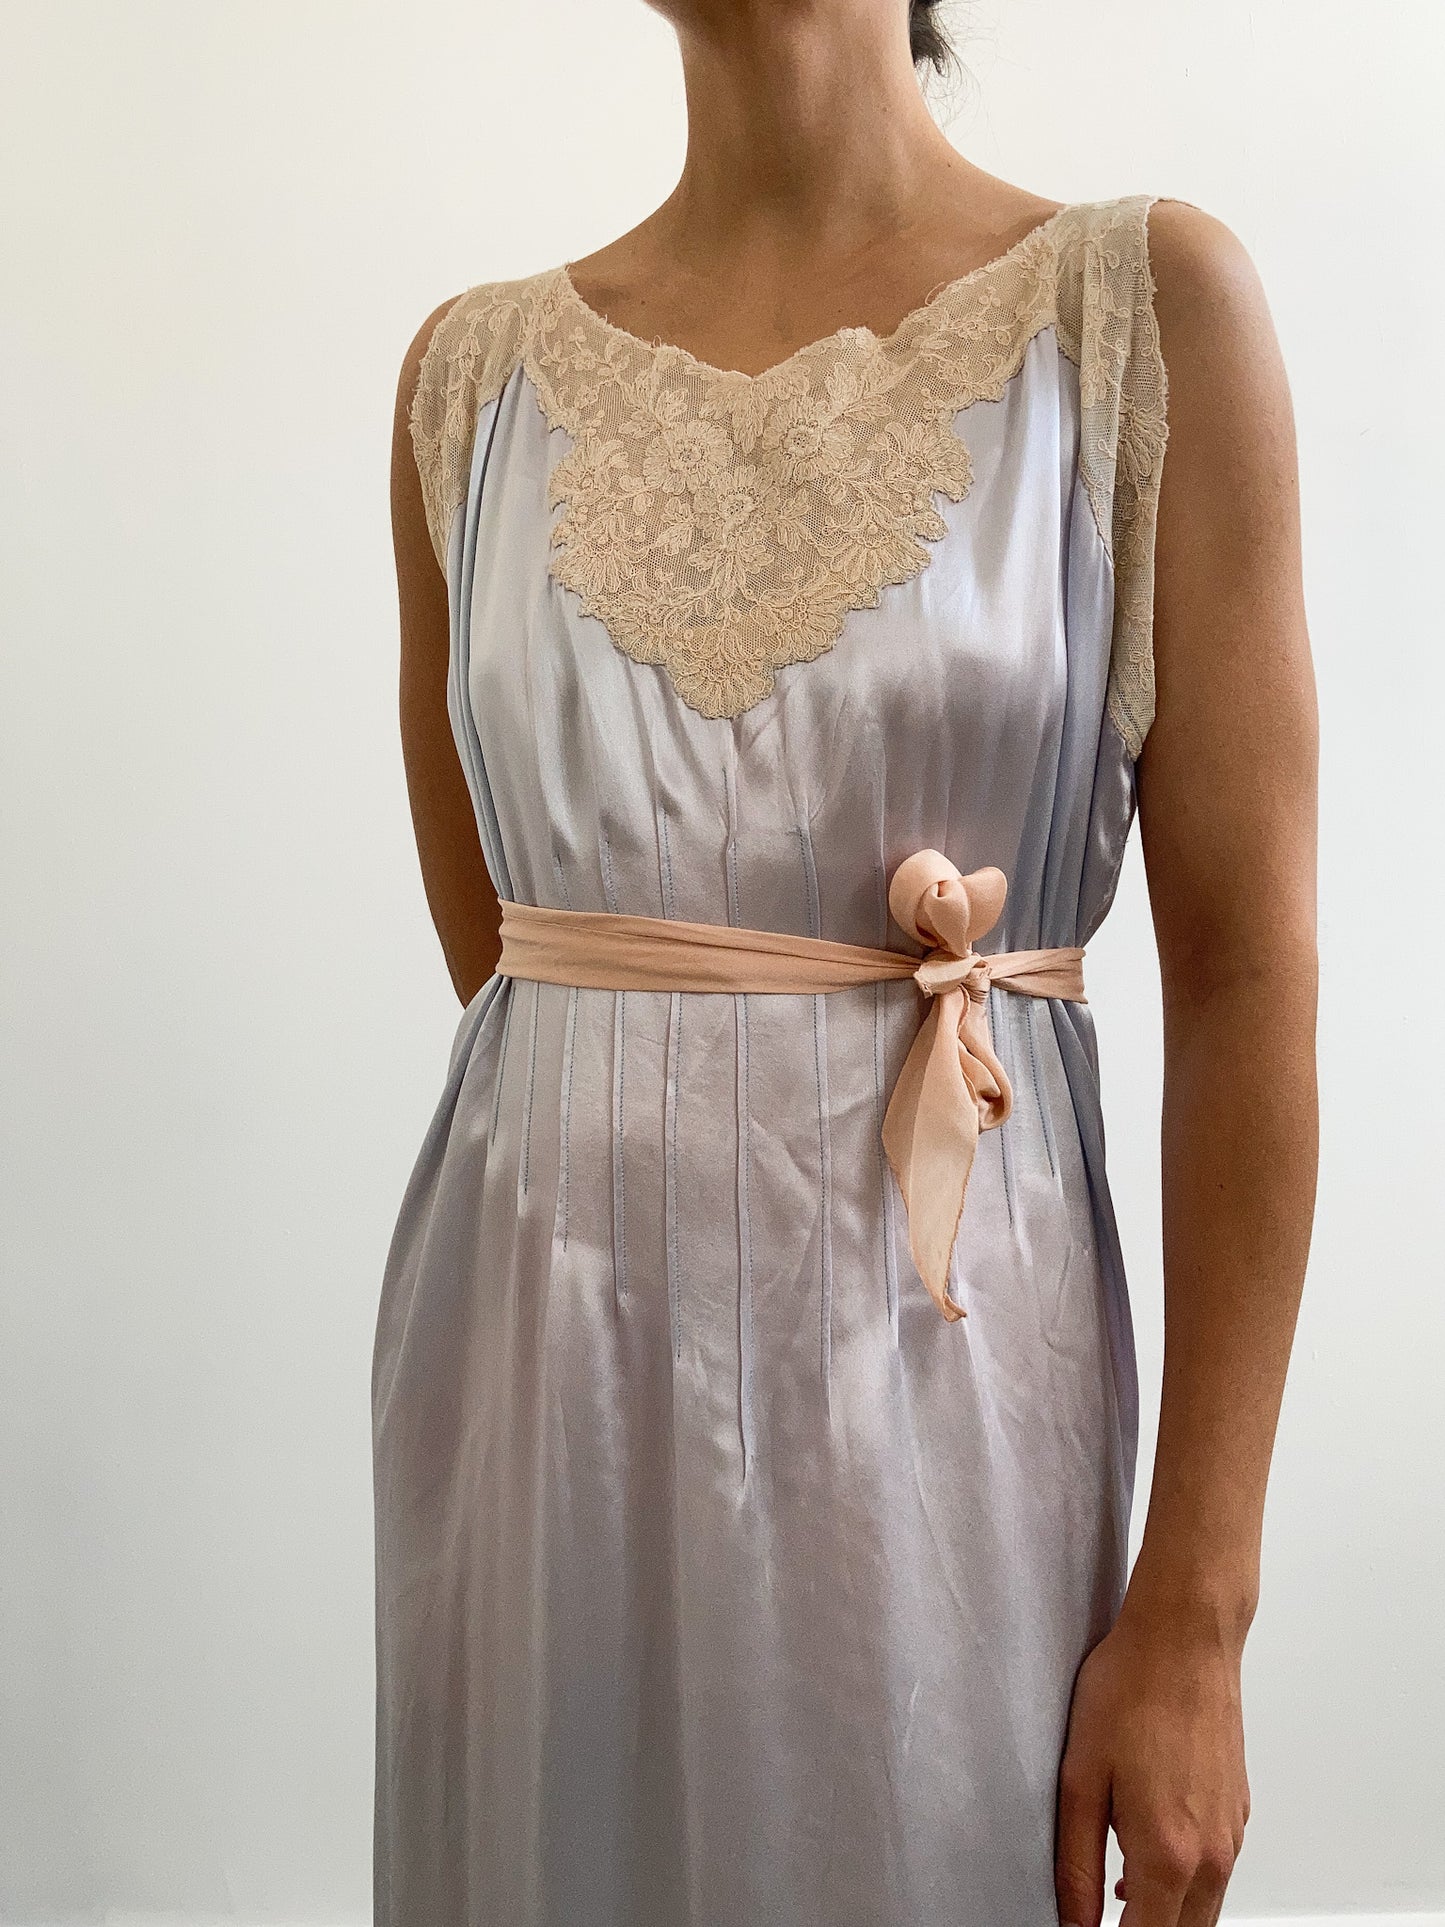 1920s Blue Silk Satin Slip with Champagne Lace Trims